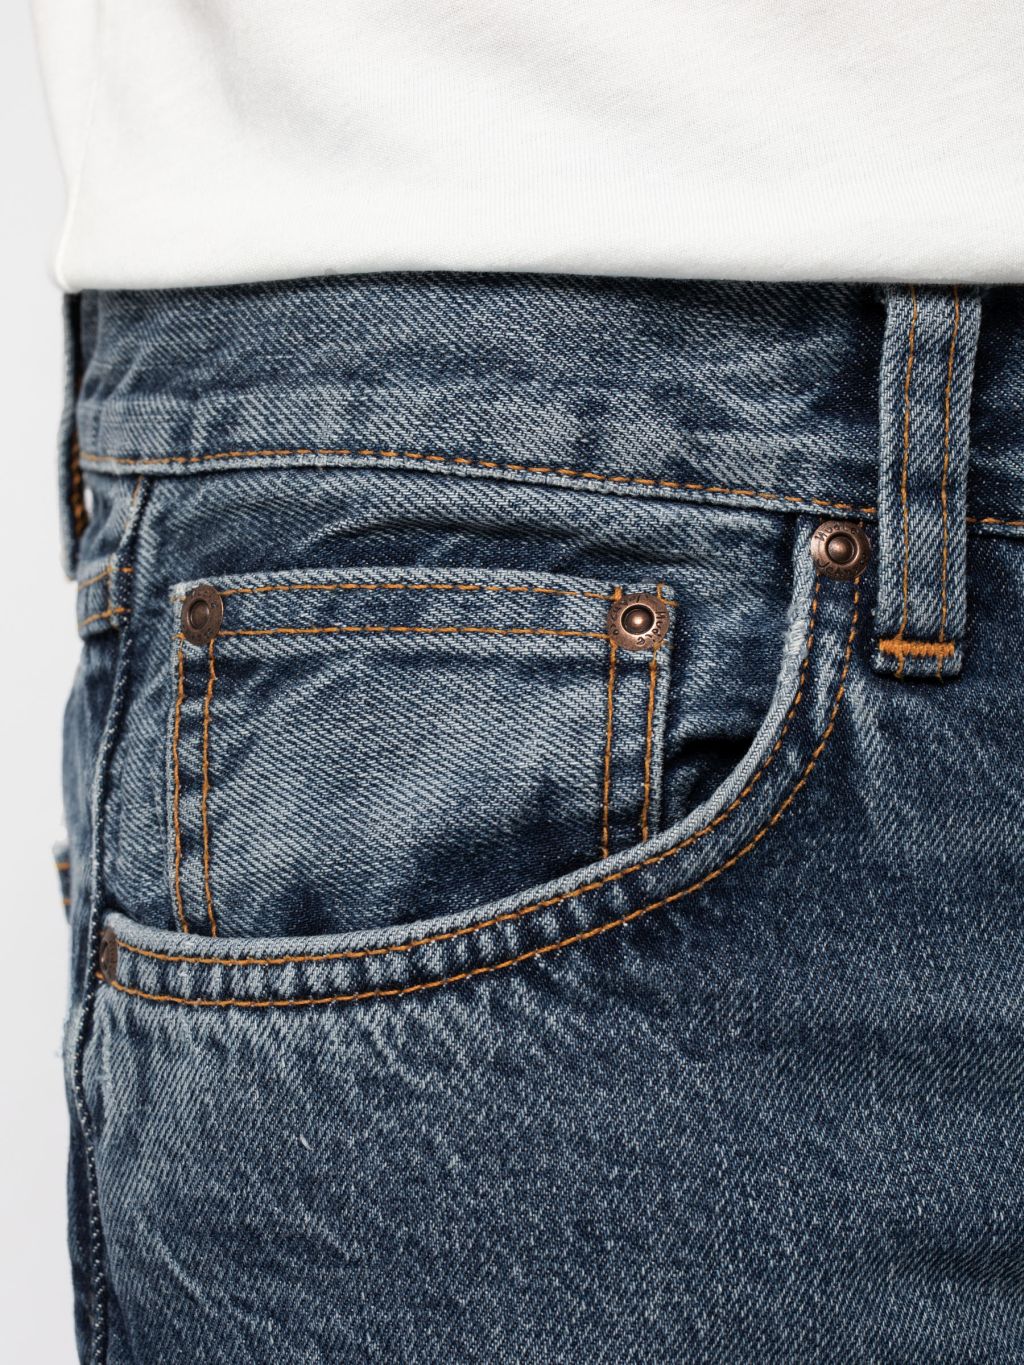 Gritty Jackson Jeans - Bio-Baumwolle-Mix Far Out 31/32